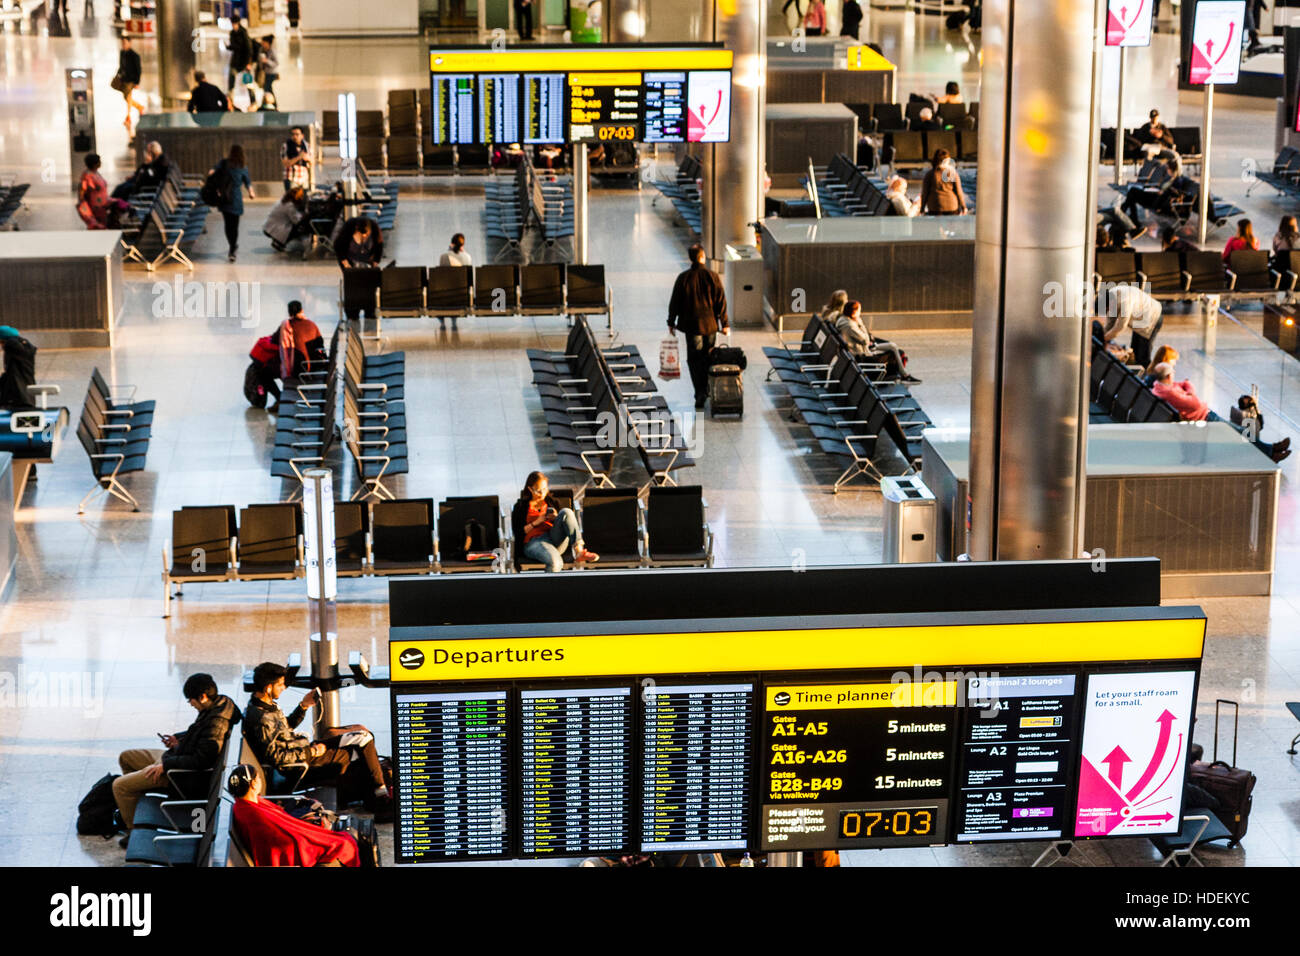 London, Heathrow airport, Terminal 2 interior. Overhead view, information boards for flight departures and times, with seating area. Not busy. Stock Photo